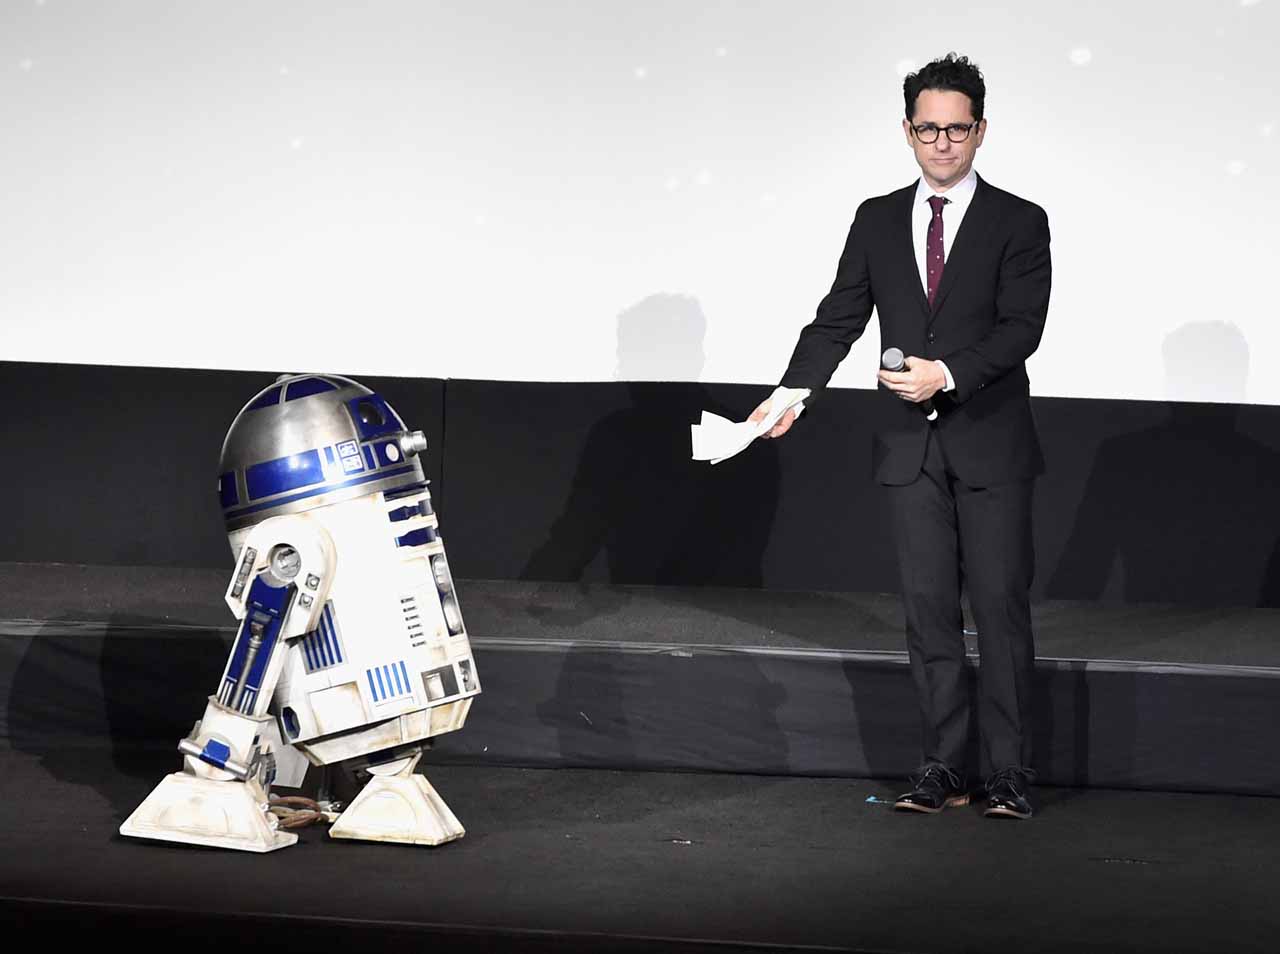 HOLLYWOOD, CA - DECEMBER 14: R2-D2 (L) and director J.J. Abrams speak onstage during the World Premiere of ?Star Wars: The Force Awakens? at the Dolby, El Capitan, and TCL Theatres on December 14, 2015 in Hollywood, California.  (Photo by Alberto E. Rodriguez/Getty Images for Disney) *** Local Caption *** R2-D2;J.J. Abrams